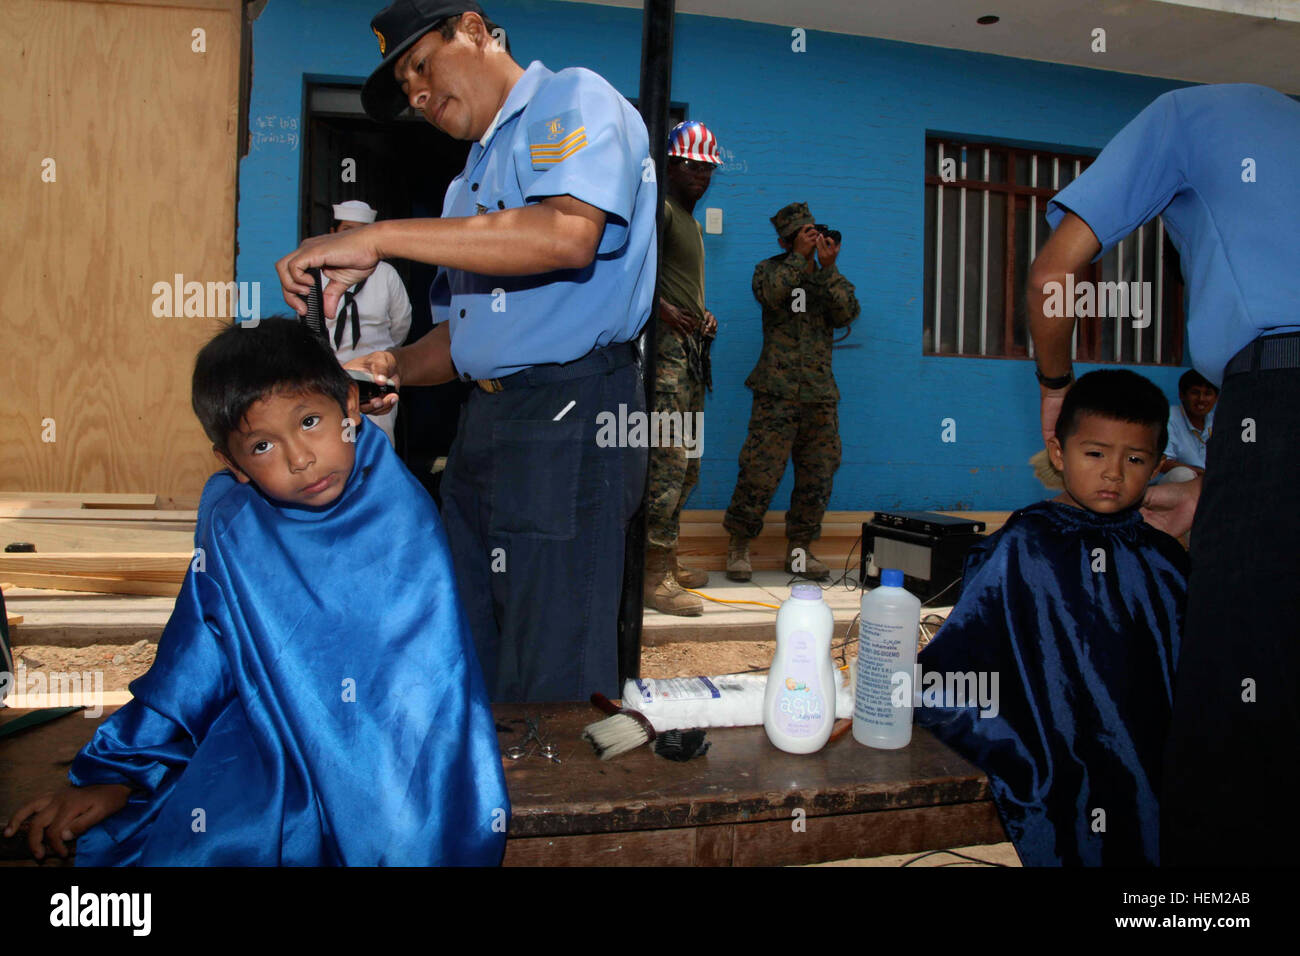 120203-A-IP644-028 CALLAO, Peru (February 3, 2012) A boy gets his hair cut by a Peruvian Sailor before a ceremony honoring the finished construction of an elementary school in Zona De Acapulco. Navy Seabees assigned to Naval Mobile Construction Battalion (NMCB 23), embarked on High Speed Vessel (HSV-2) Swift, were refurbishing the school with Peruvian combat engineers from Base Naval De Callao and Brigada Infanteria De Marina De Ancon as a part of HSV-Southern Partnership Station 2012 (HSV-SPS 12). HSV-SPS is an annual deployment of U.S. Navy ships and assets to the U.S. Southern Command???s a Stock Photo